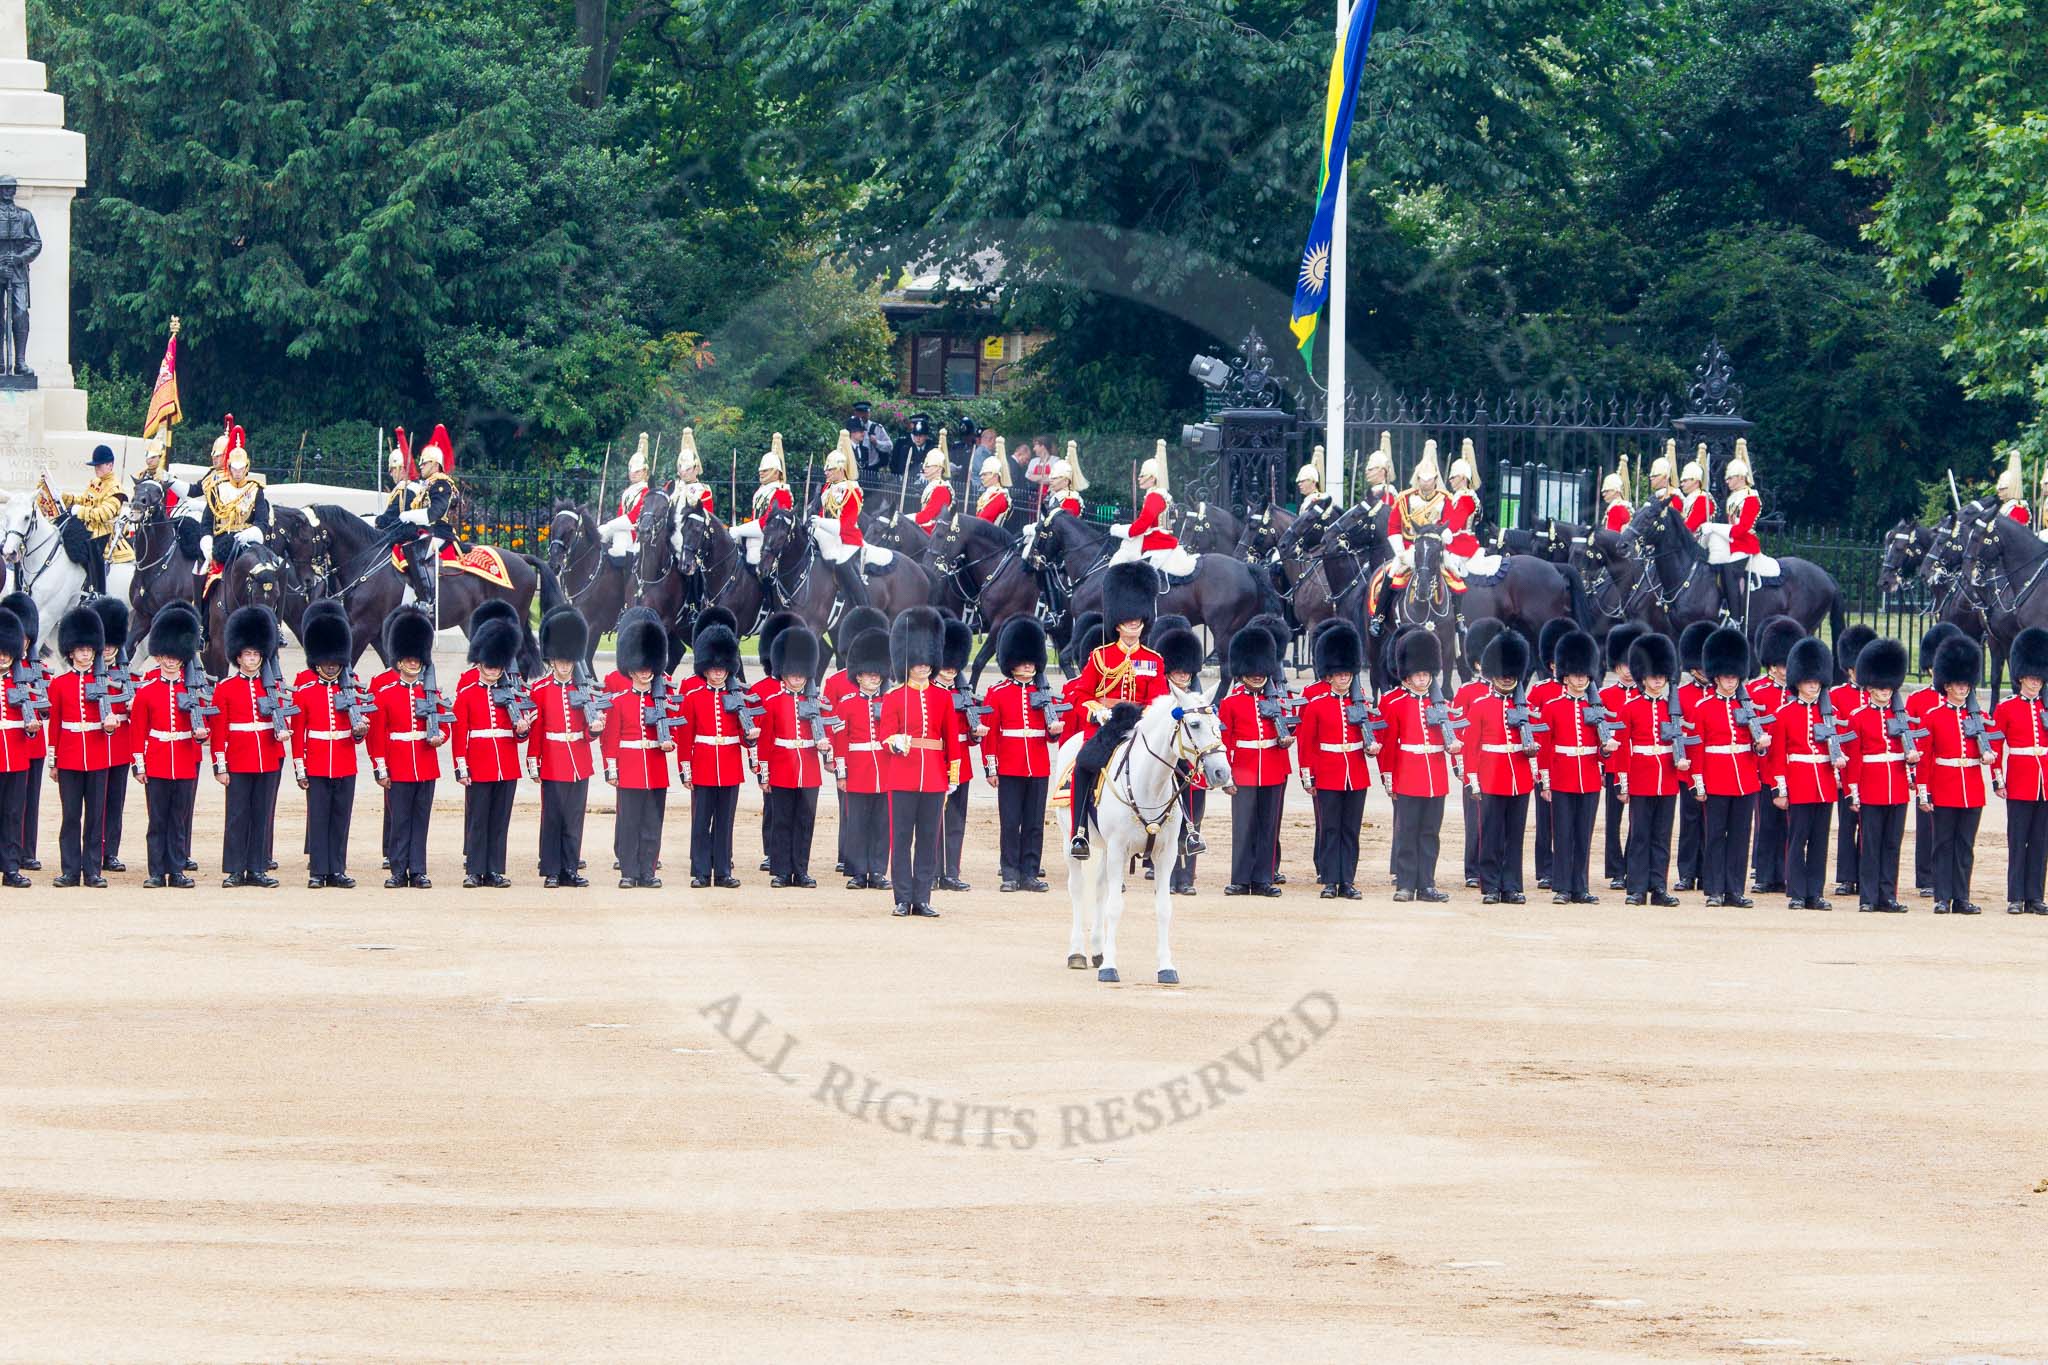 Trooping the Colour 2014.
Horse Guards Parade, Westminster,
London SW1A,

United Kingdom,
on 14 June 2014 at 12:03, image #851